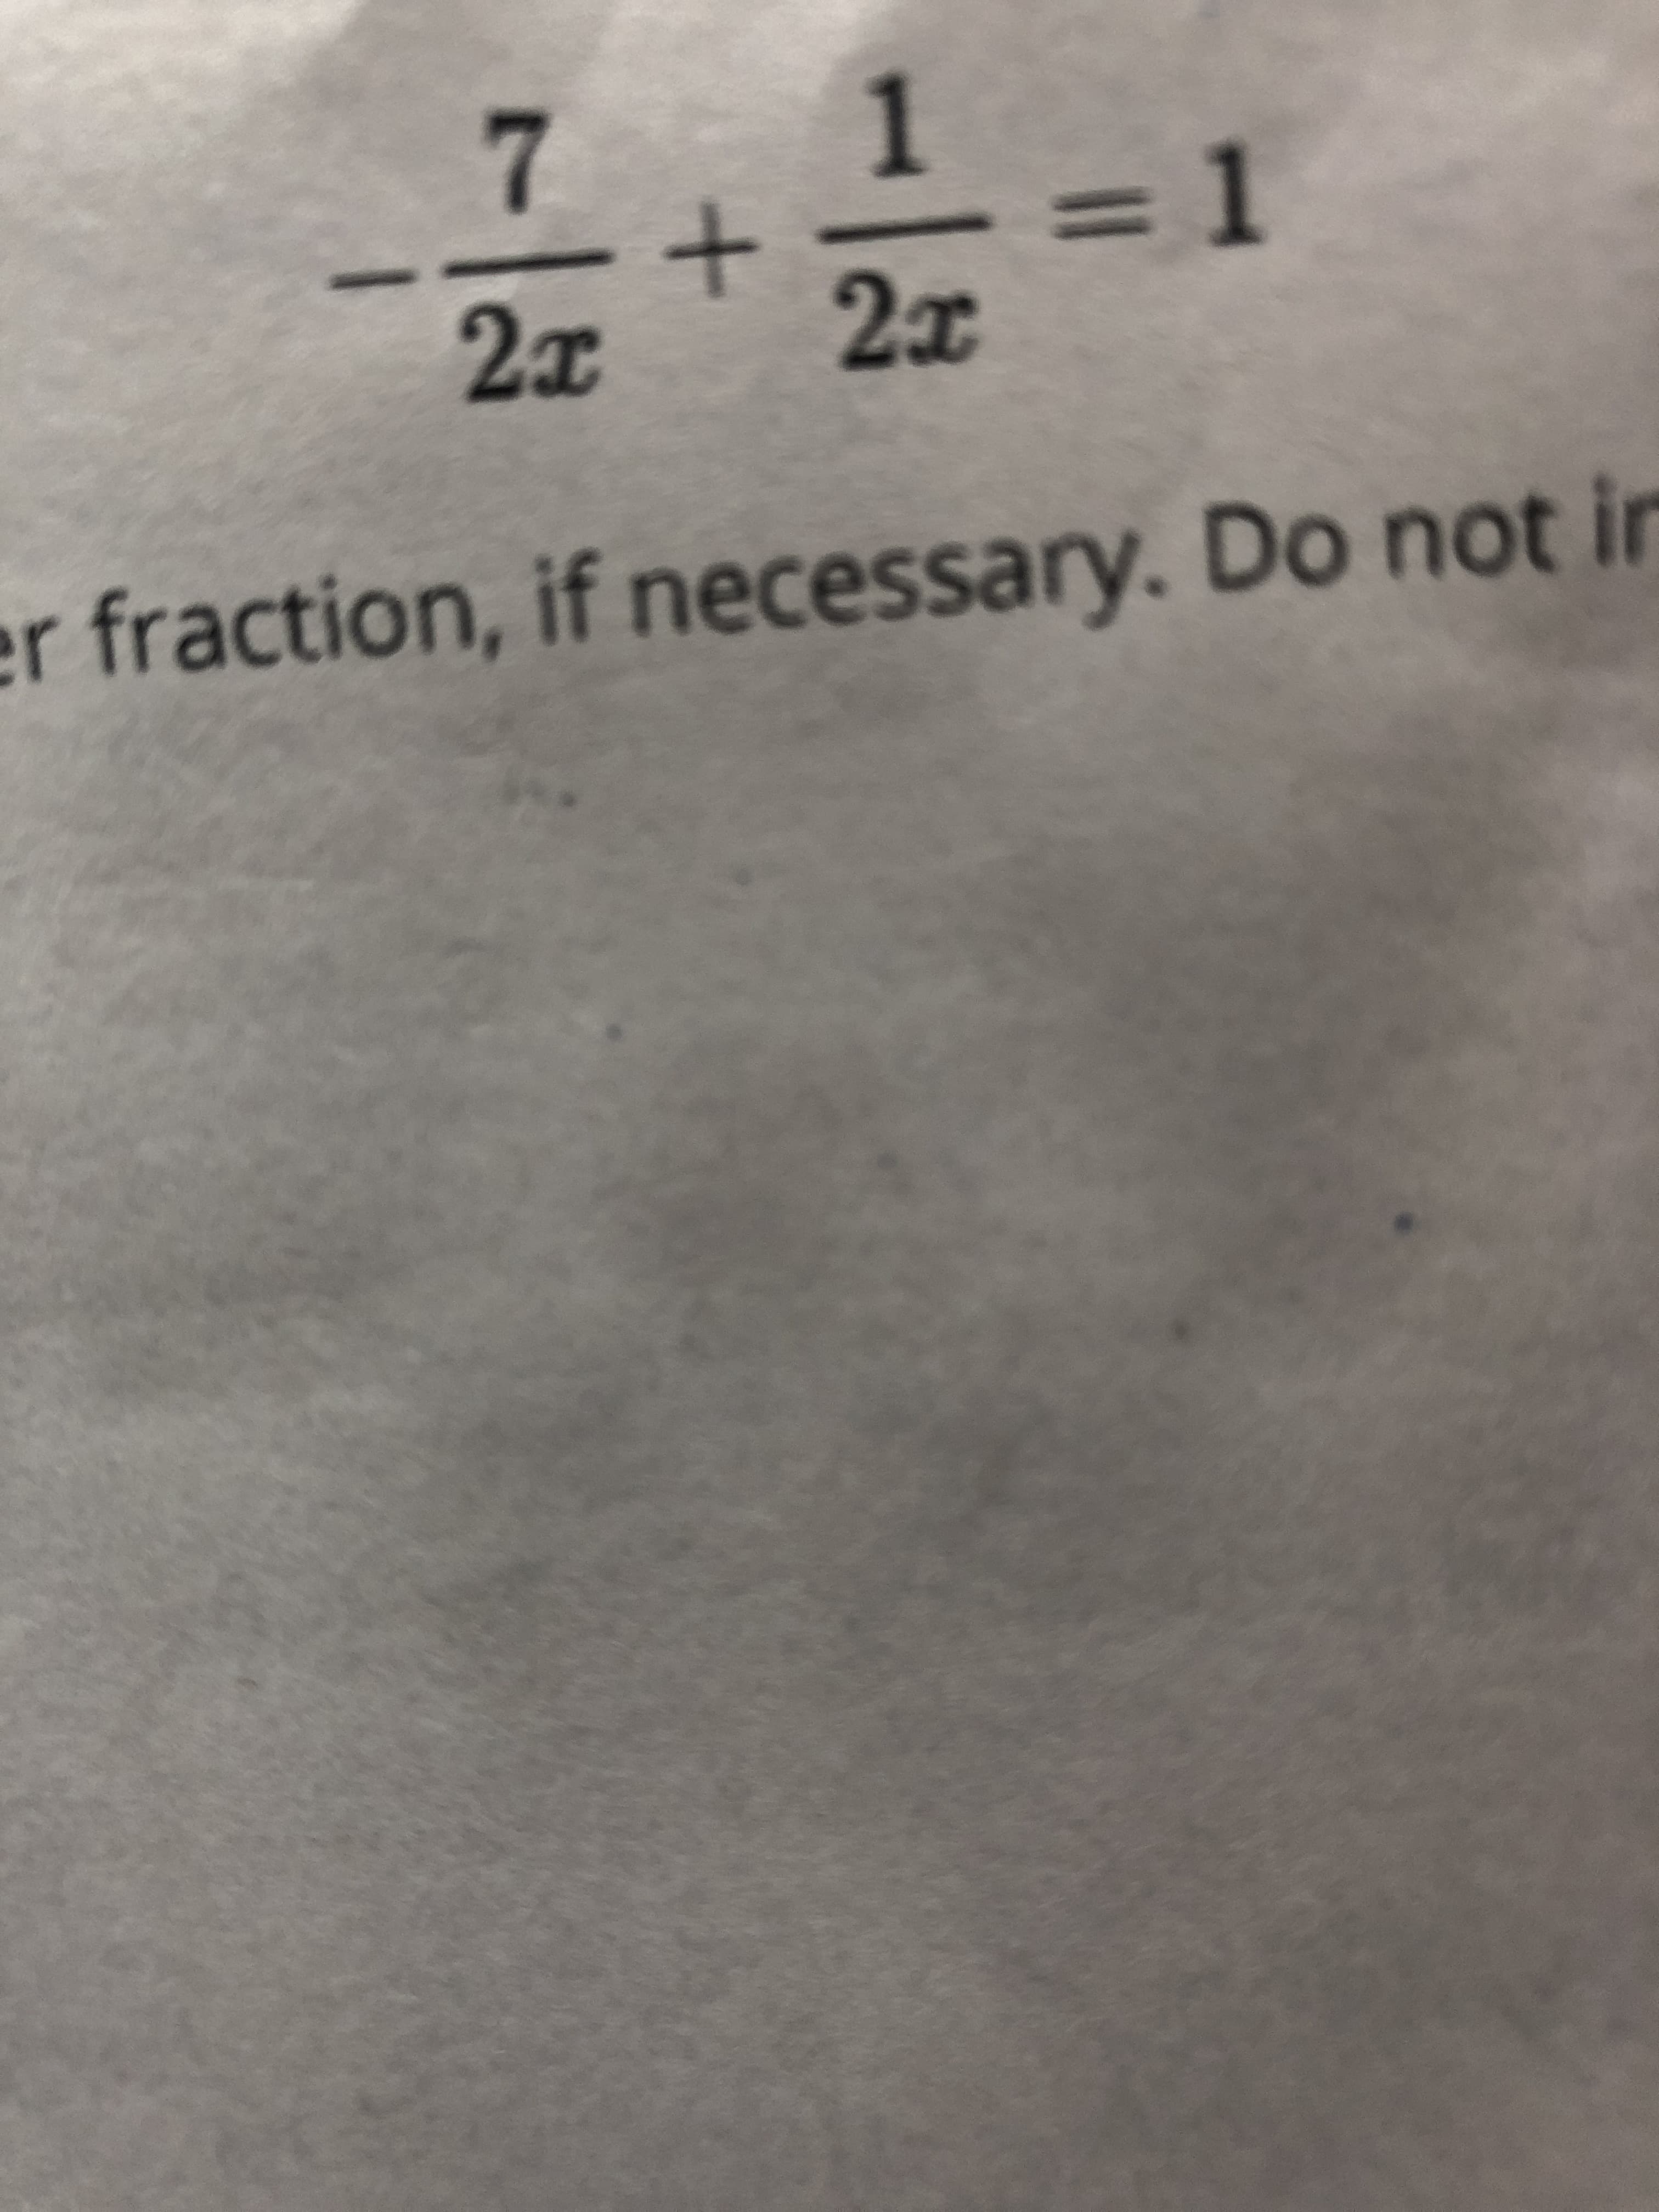 7.
2x
2x
er fraction, if necessary. Do not in
